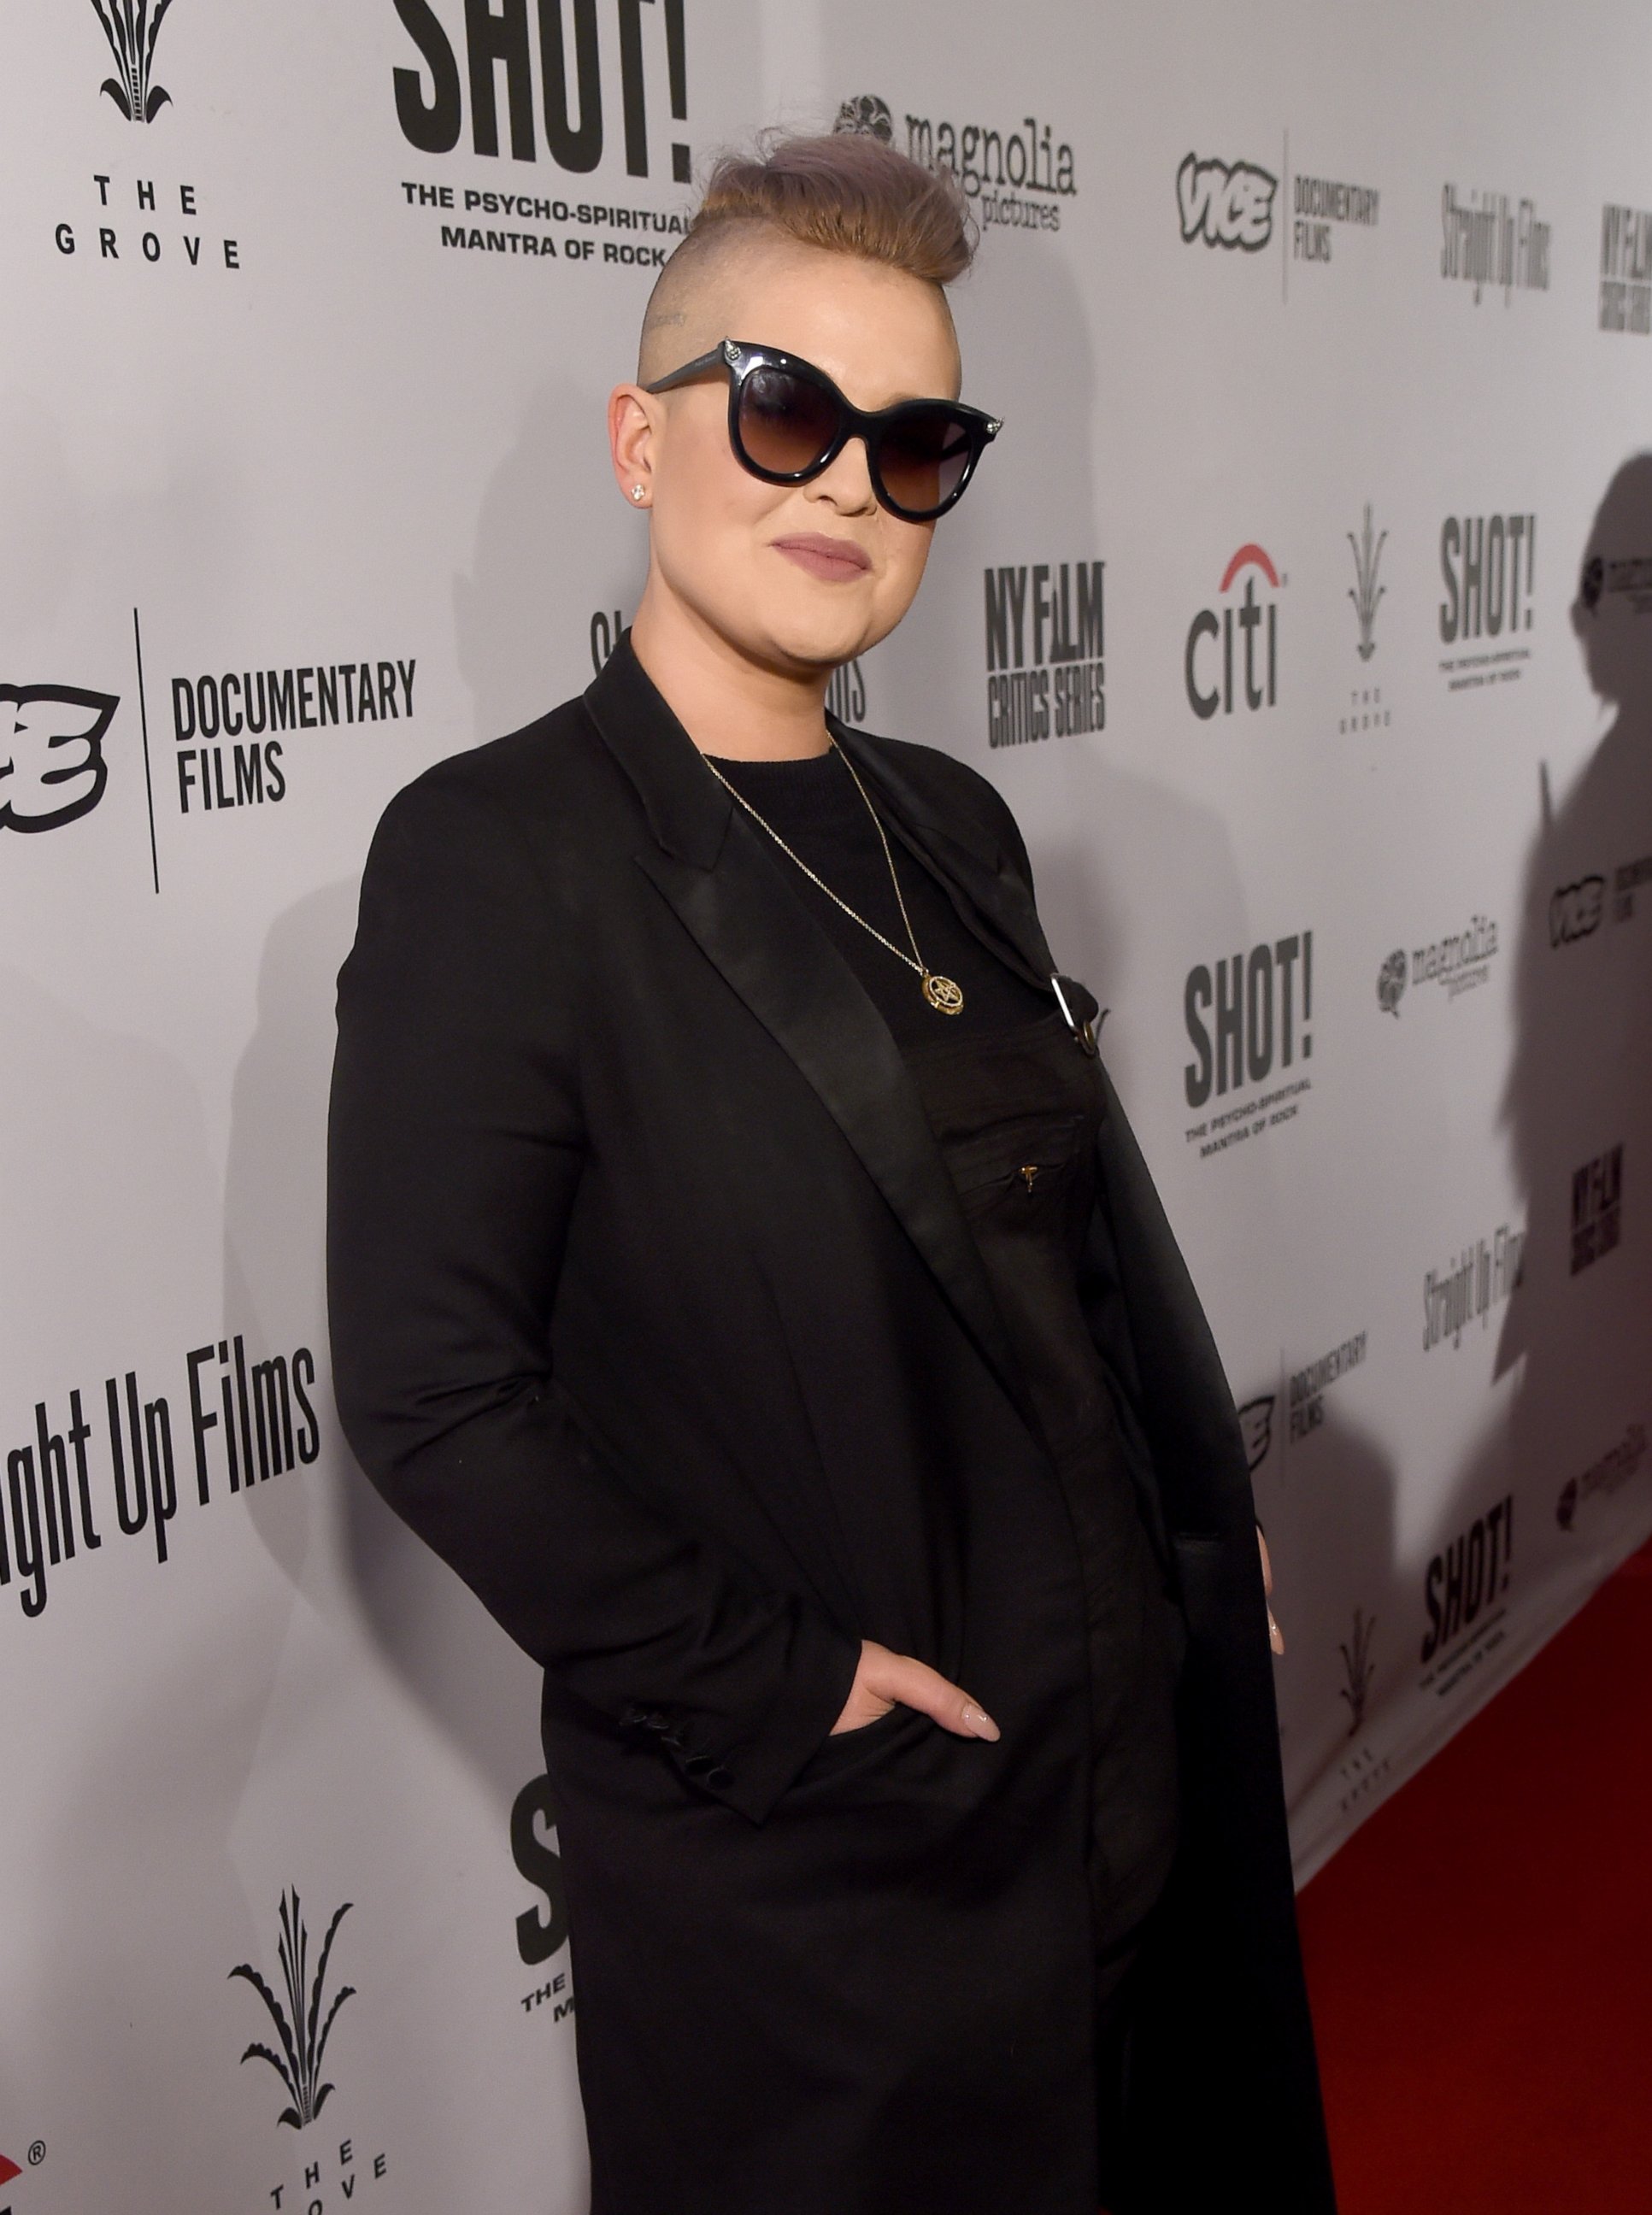 PHOTO: Kelly Osbourne attends the screening for "SHOT! The Psycho Spiritual Mantra of Rock" at The Grove presented by CITI on April 5, 2017 in Los Angeles.